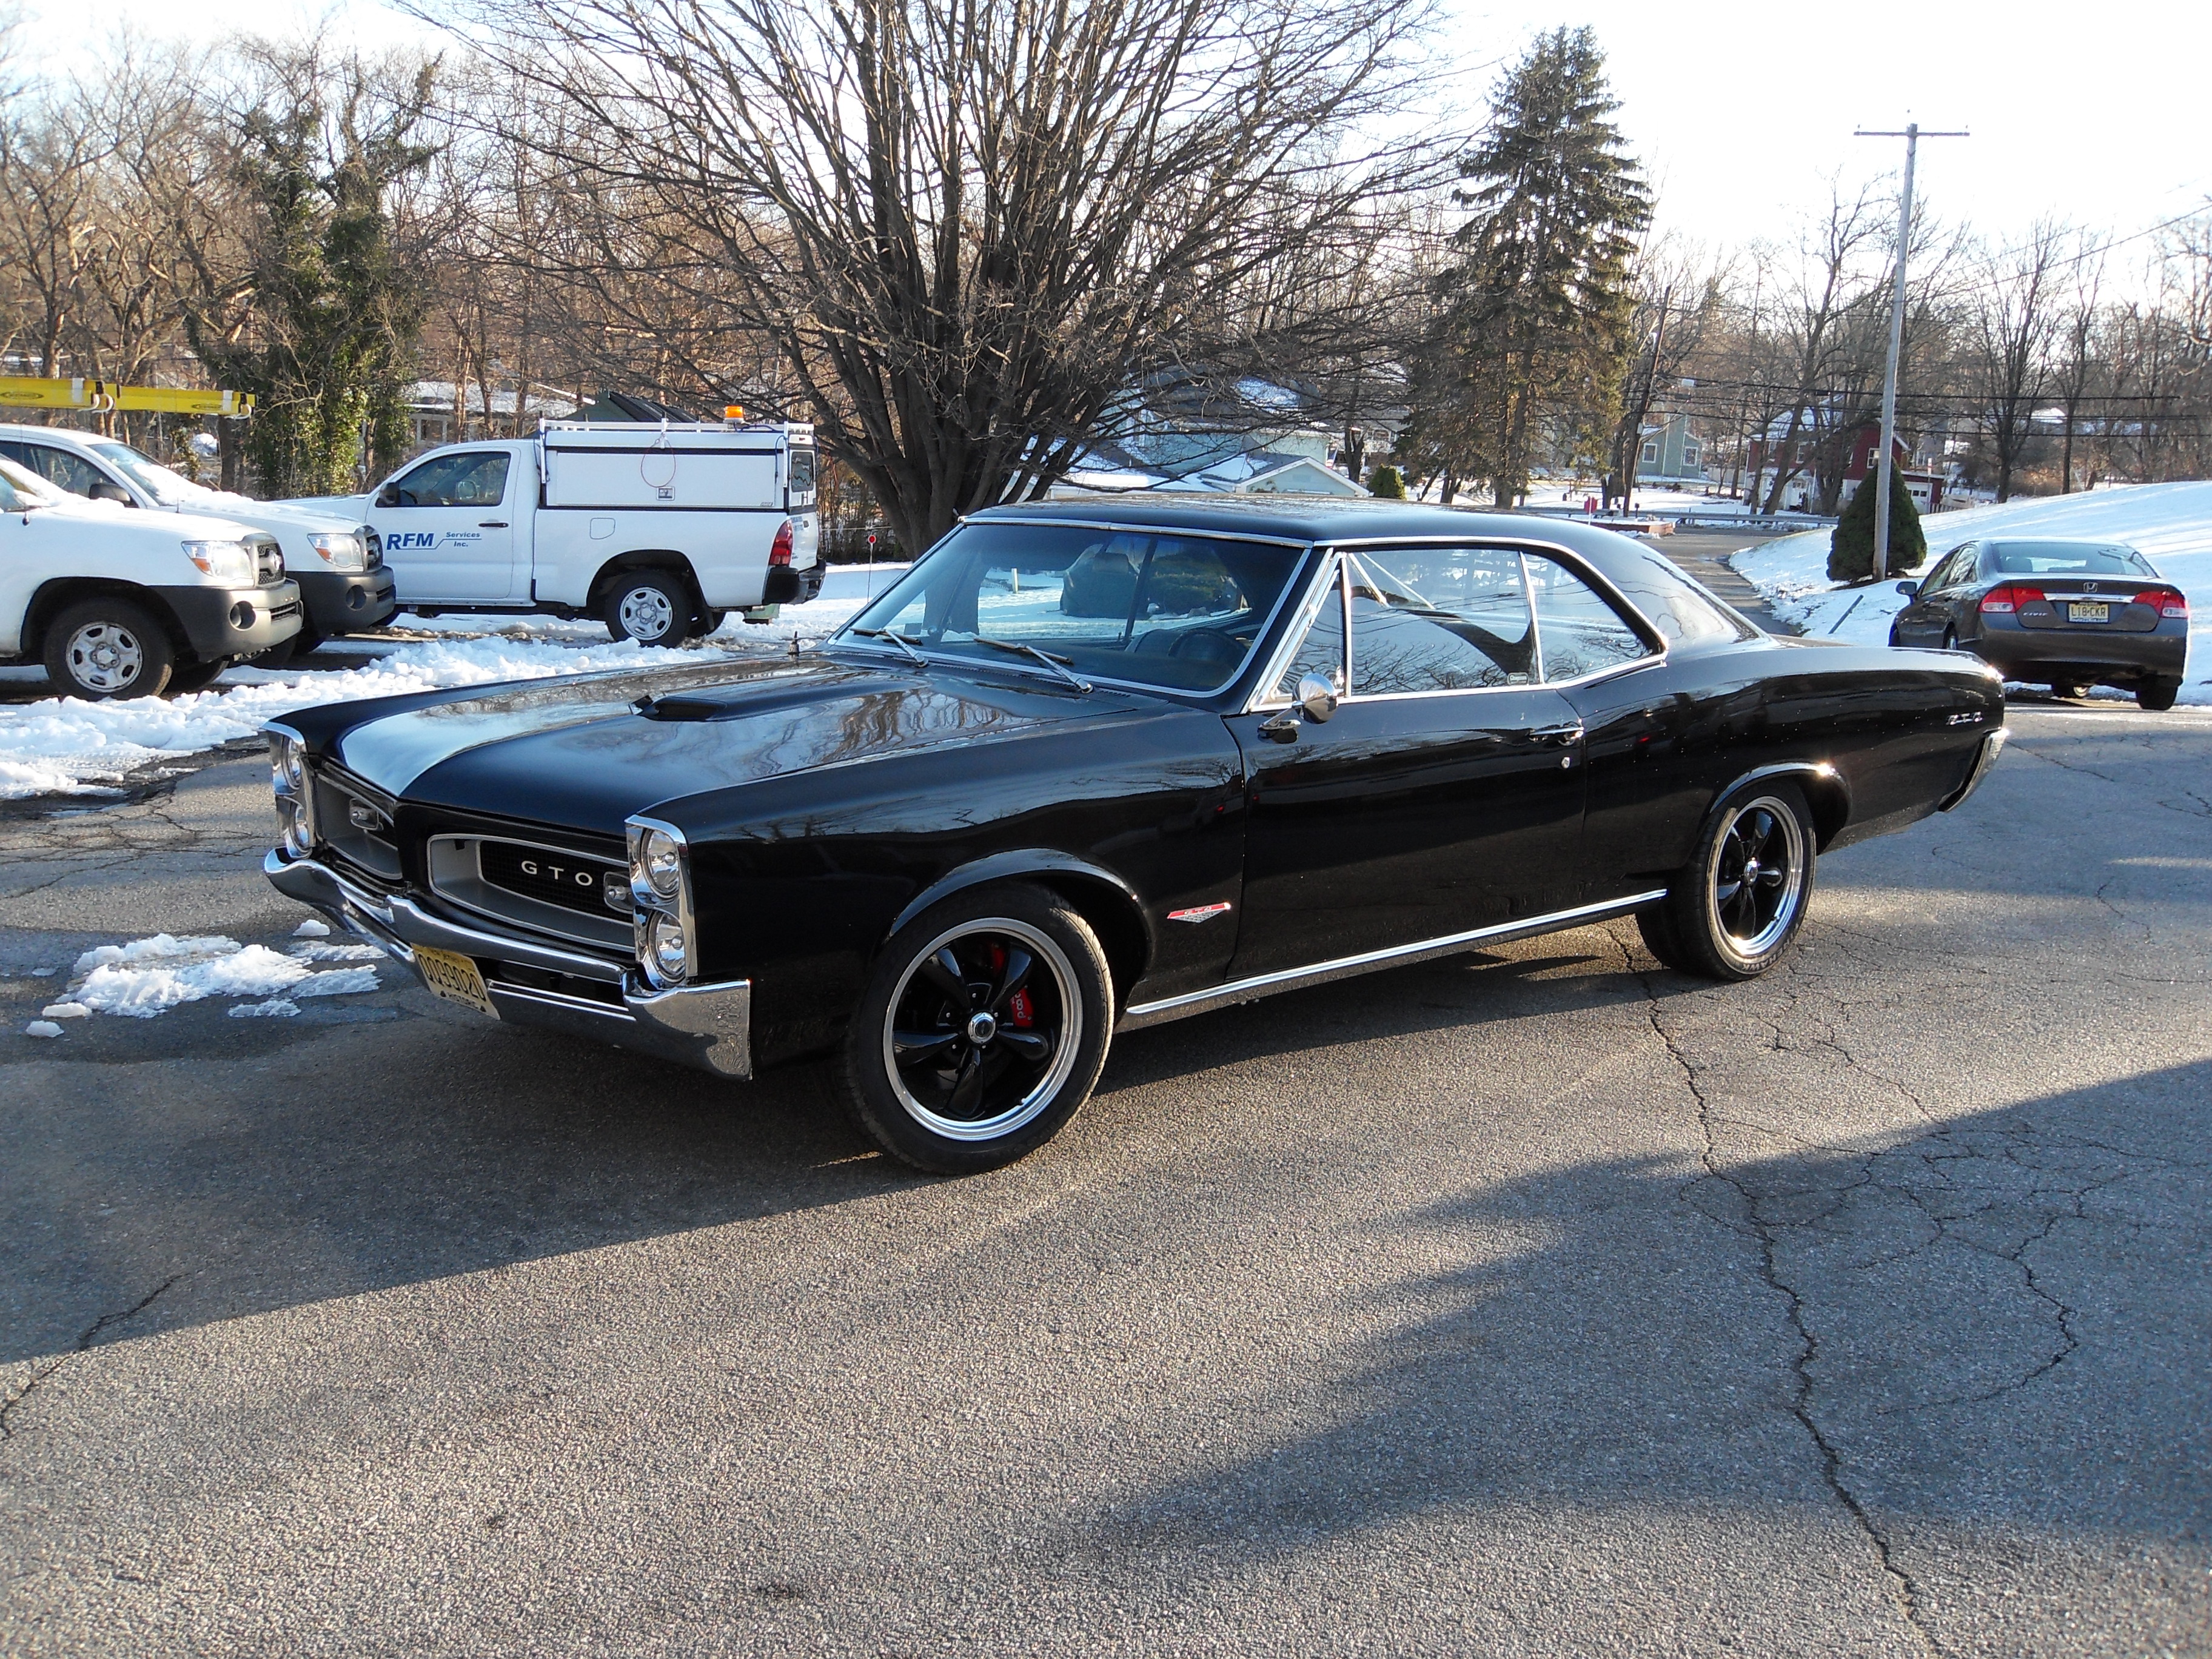 1966 GTO completed